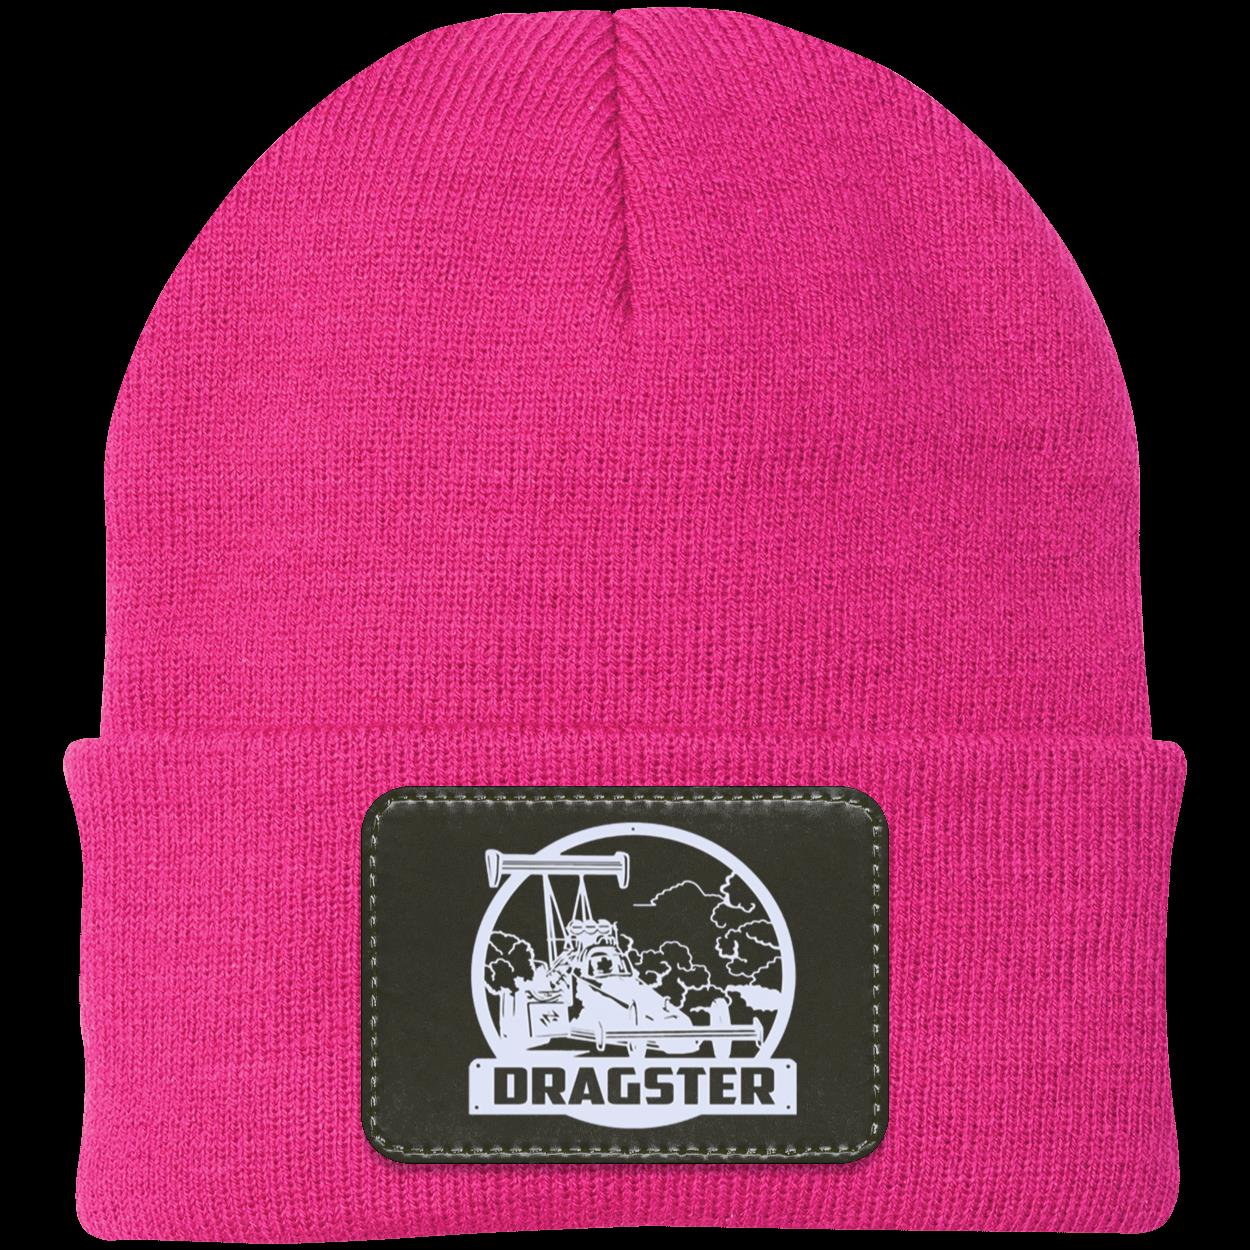 Dragster Patched Knit Cap